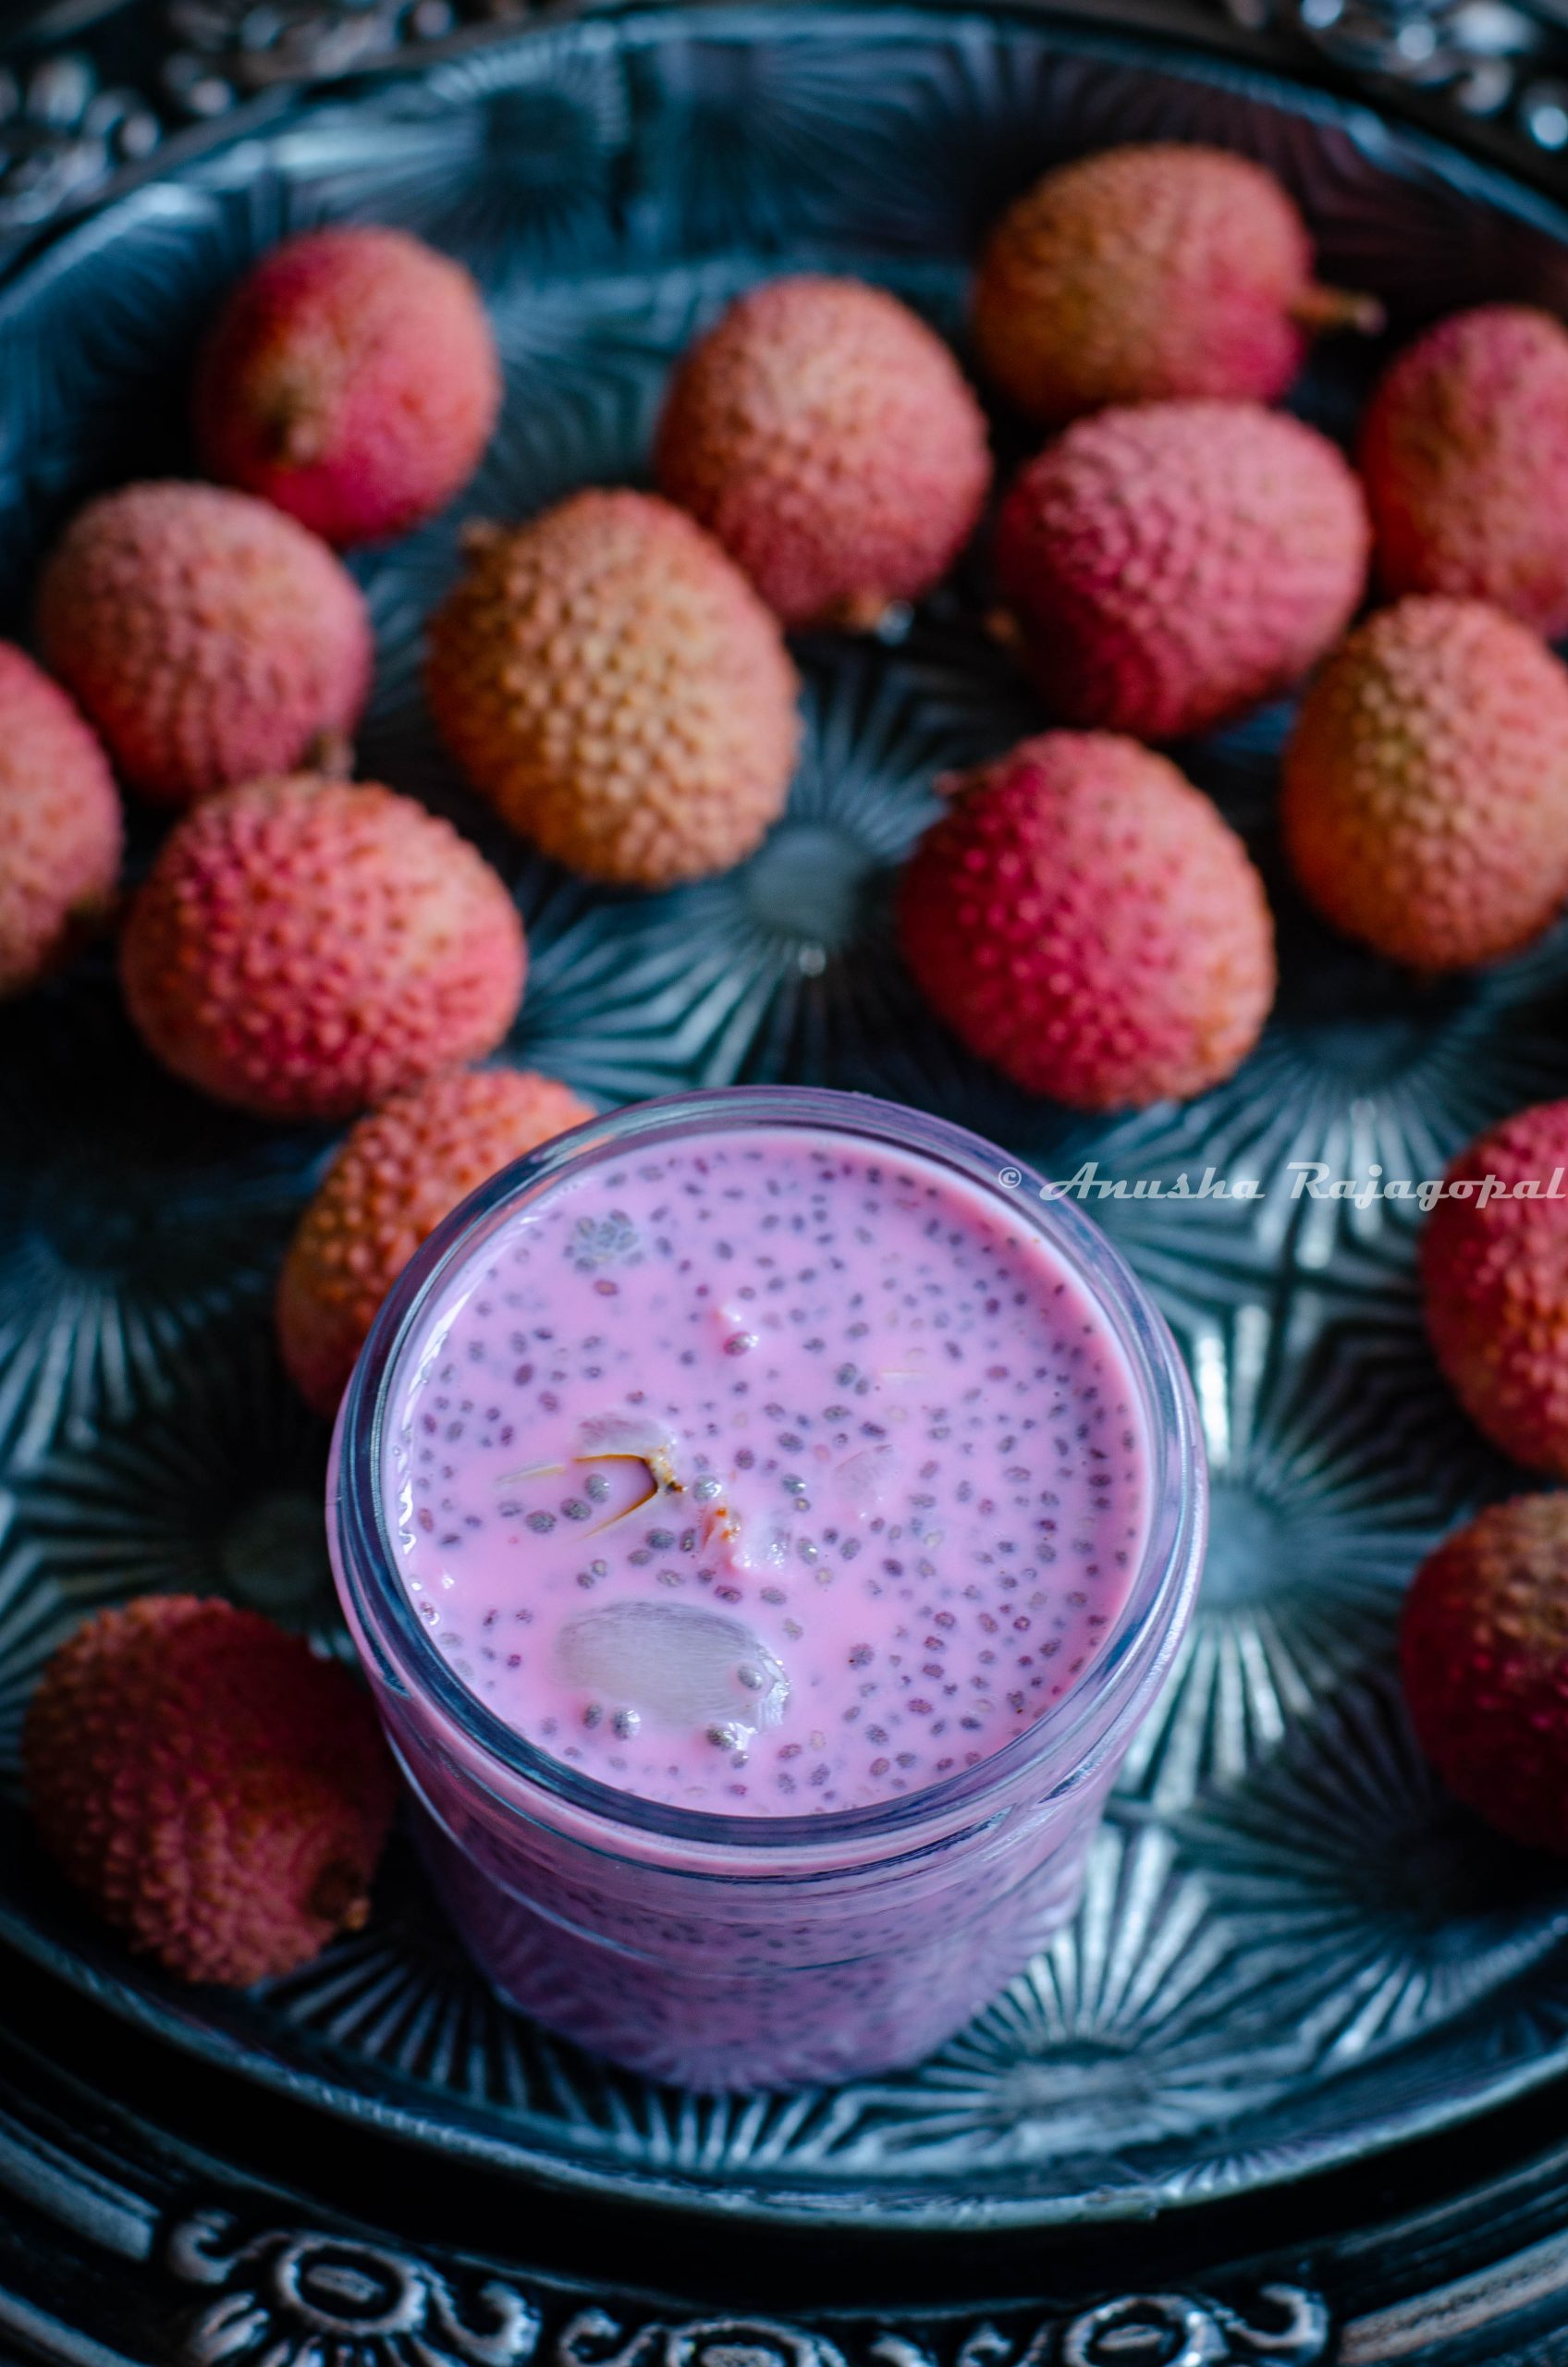 Lychee rose chia pudding in a glass jar surrounded by lychees on an vintage platter